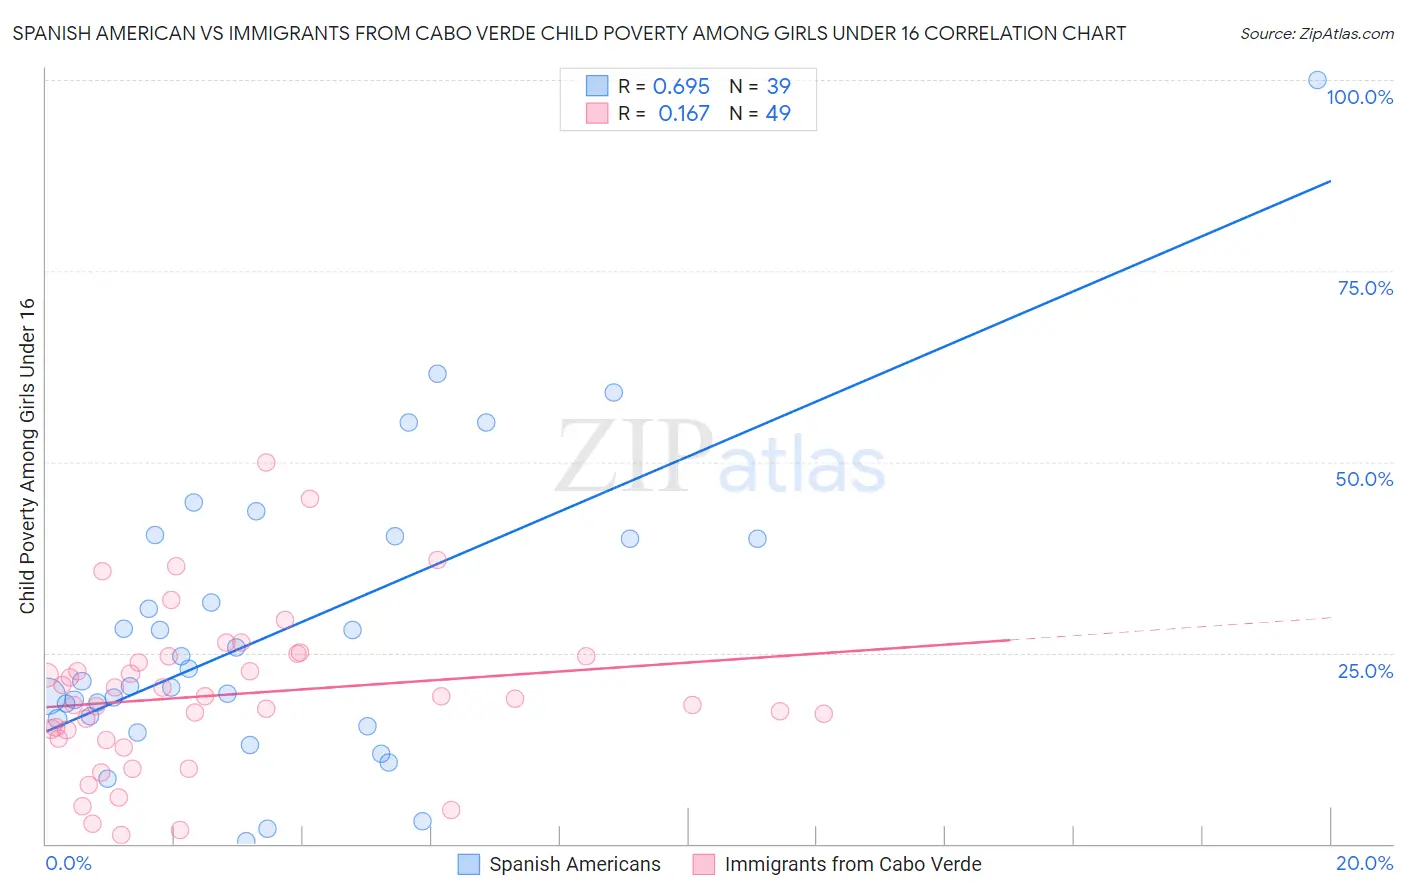 Spanish American vs Immigrants from Cabo Verde Child Poverty Among Girls Under 16